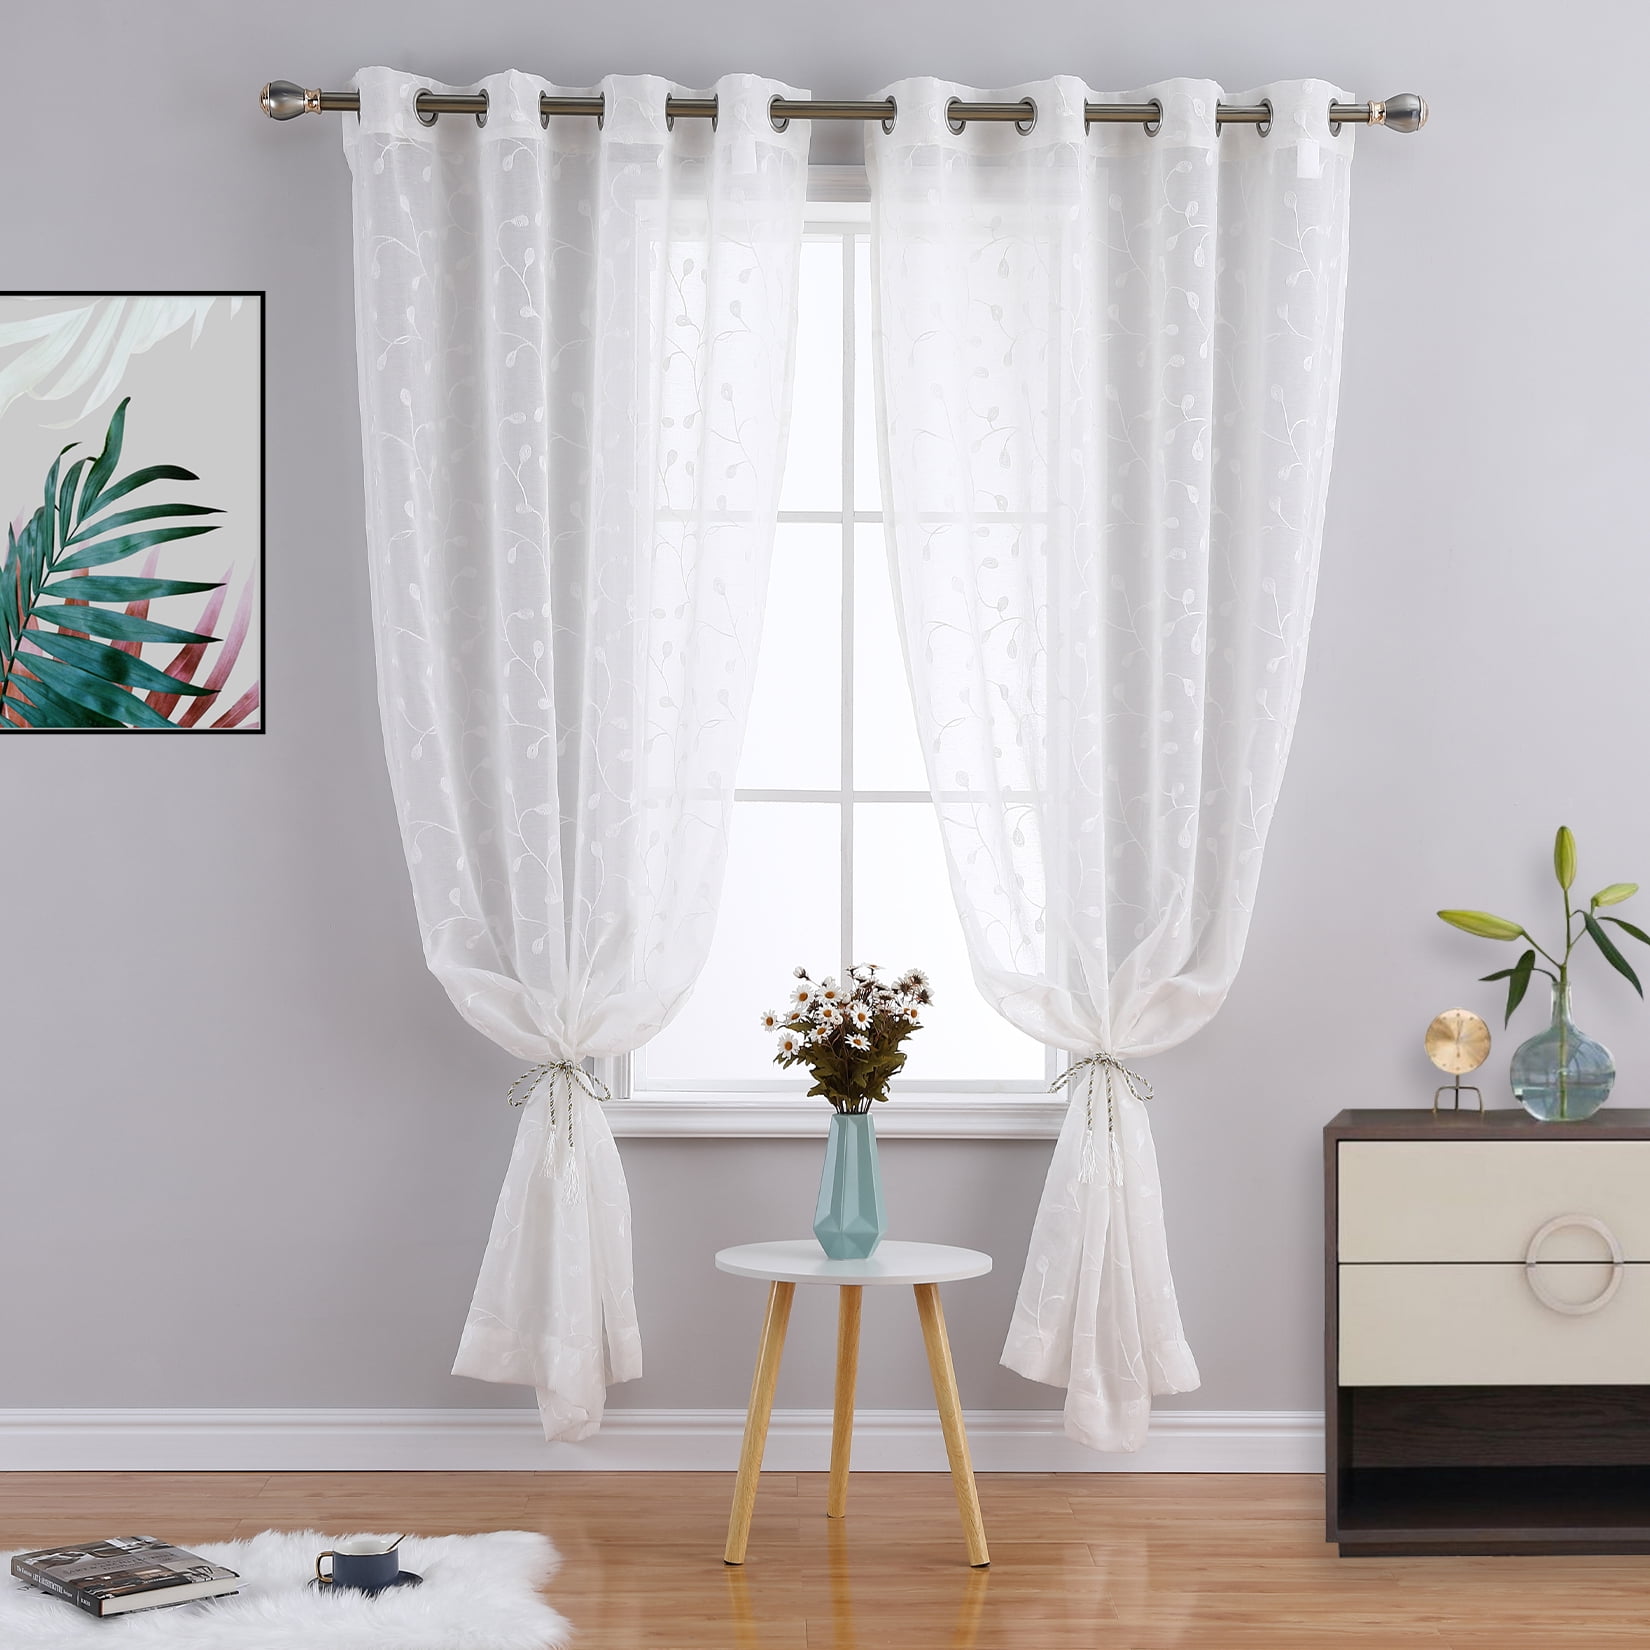 Curtainworks Kendall Solid Semi-Sheer Grommet Single Curtain Panel - Size: 52 W x 84 L, Color: Ivory